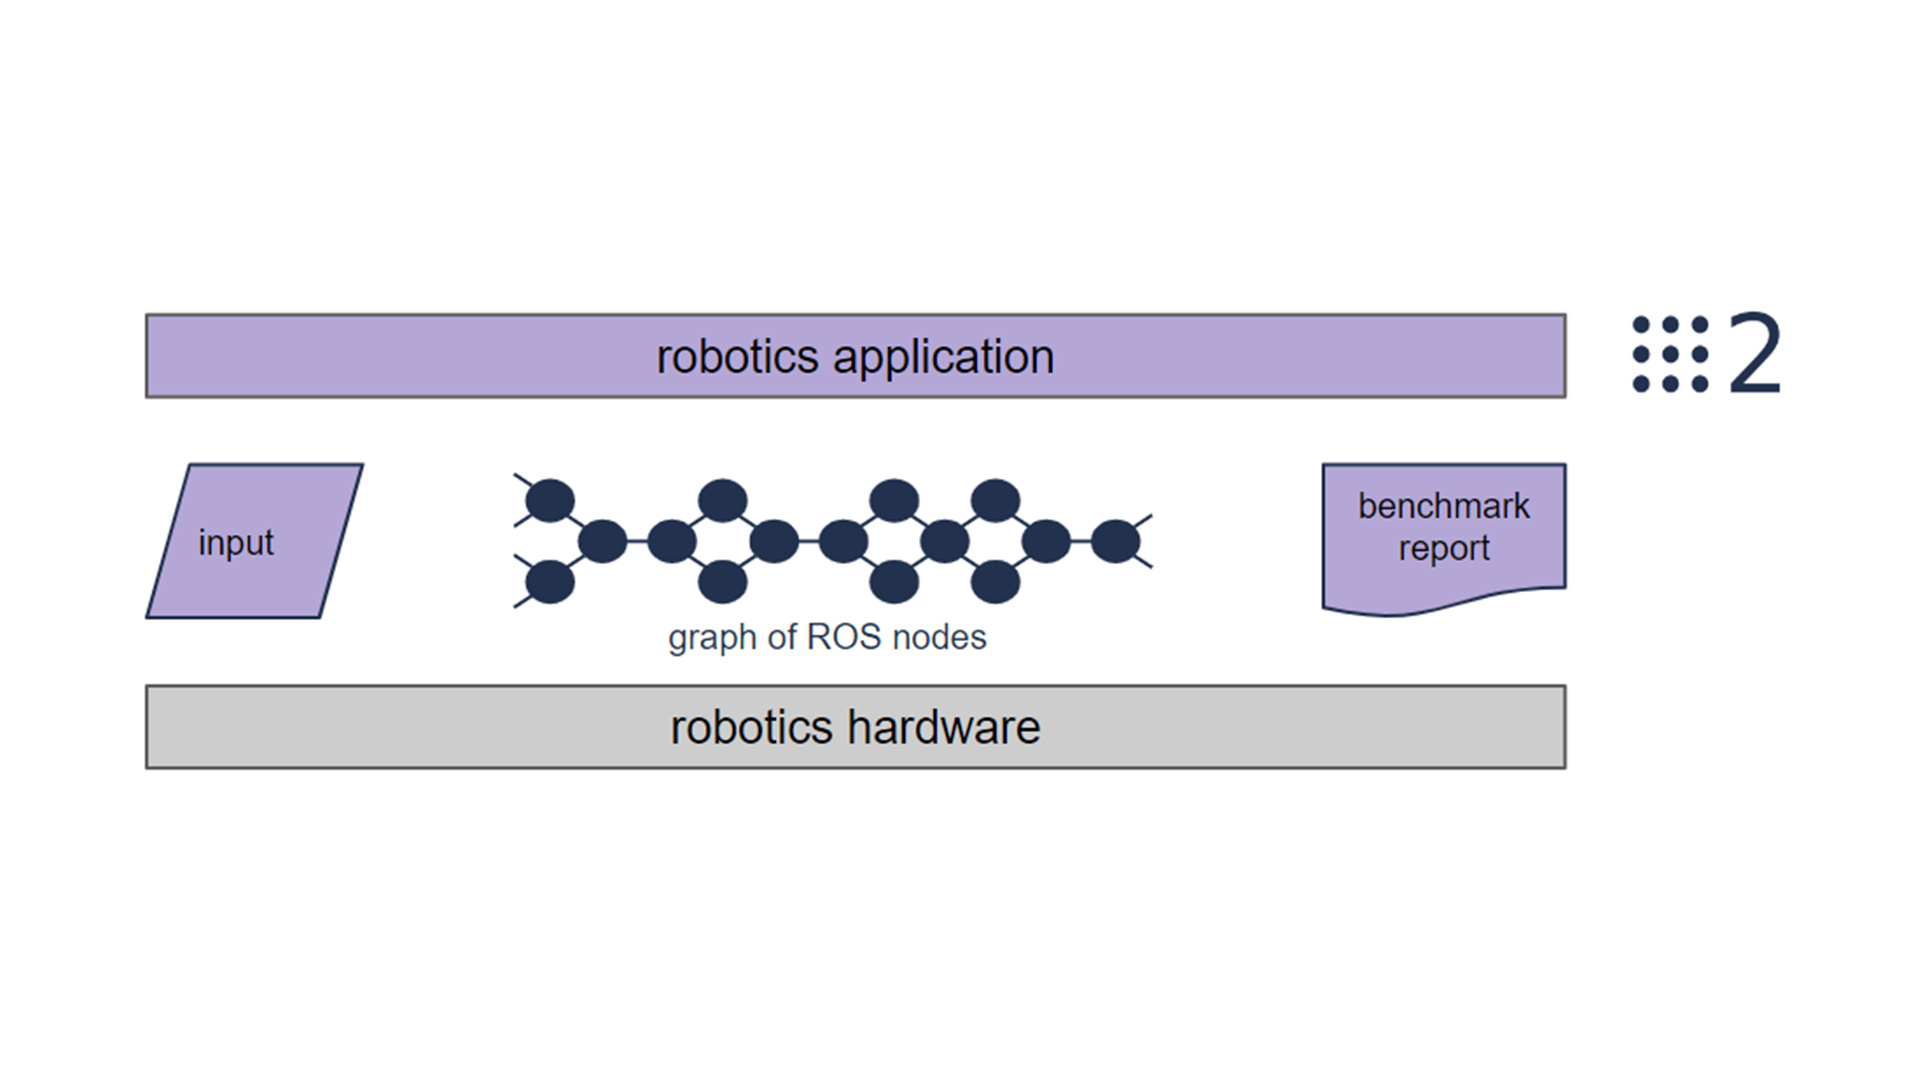 Diagram of how ROS helps benchmarking for robotics applications and hardware.